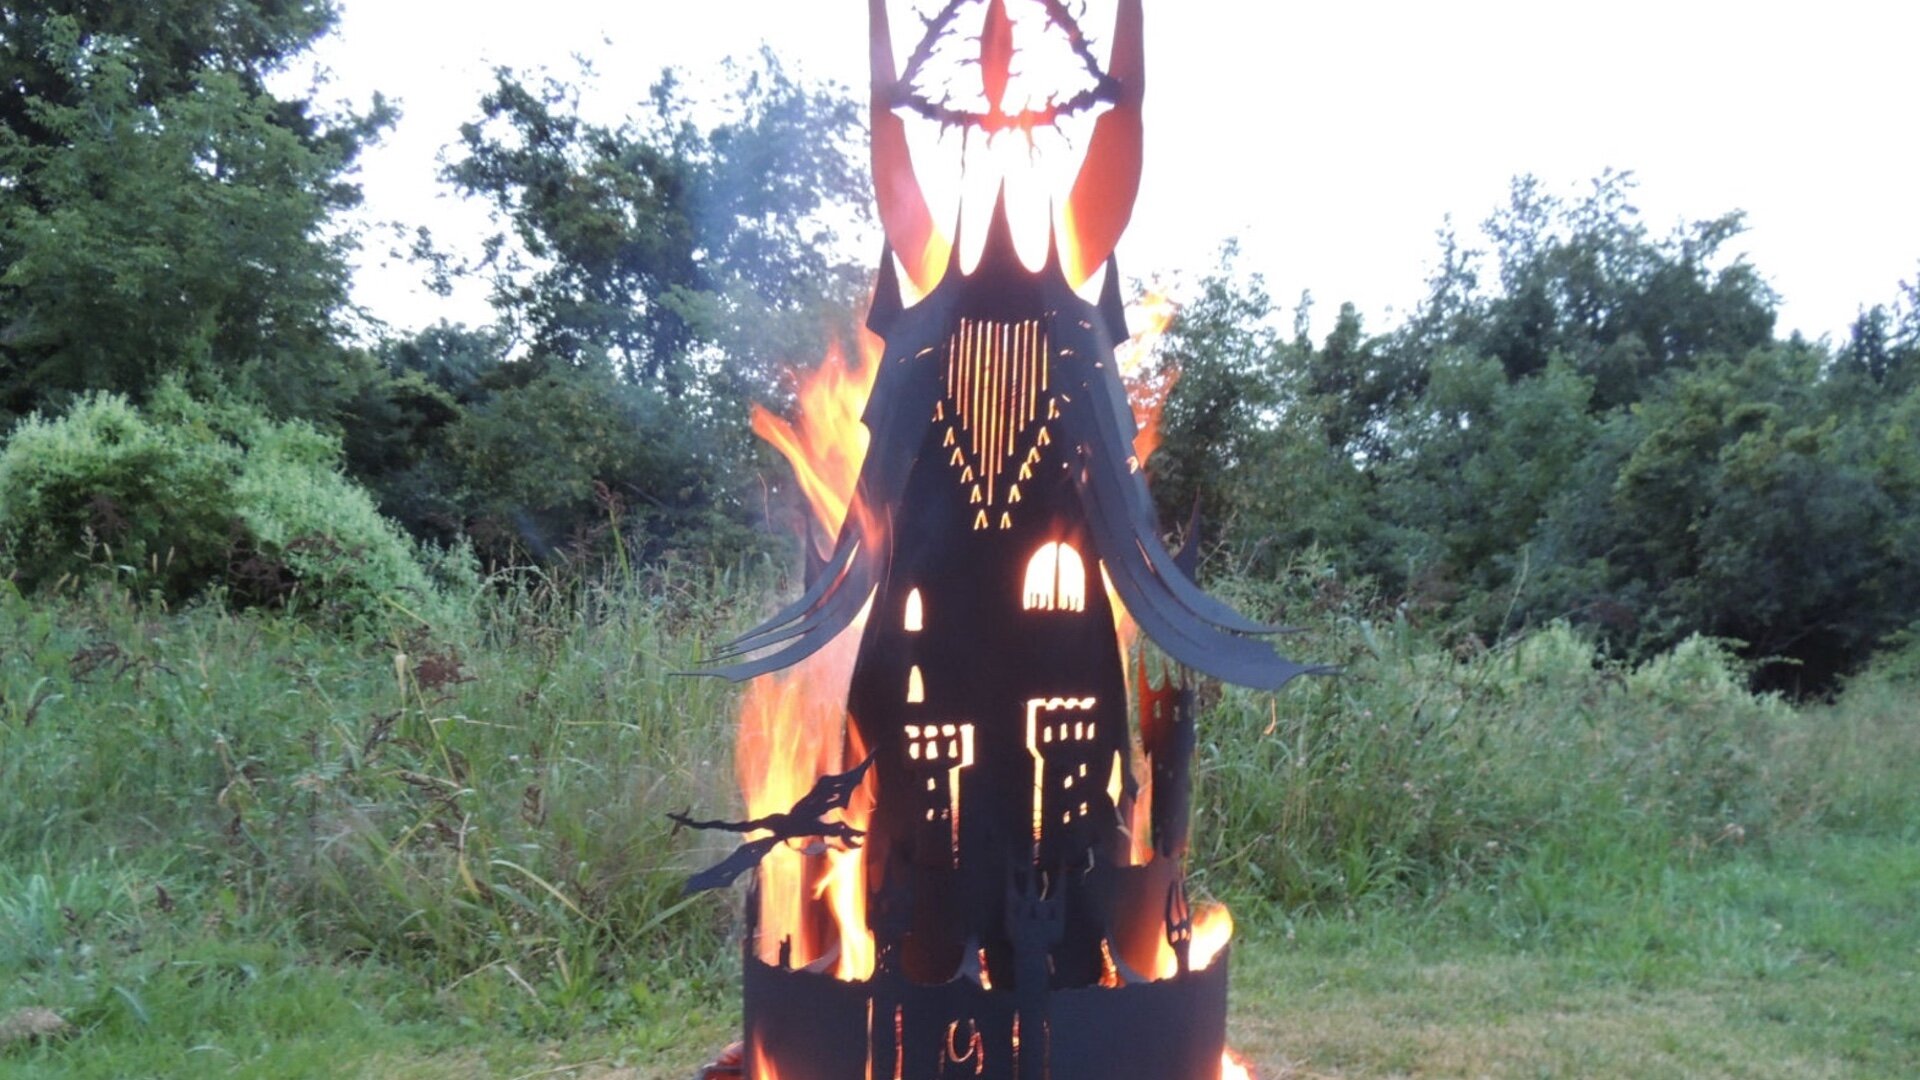 Rings Inspired Eye Of Sauron Fire Pit, Lord Of The Rings Fire Pit